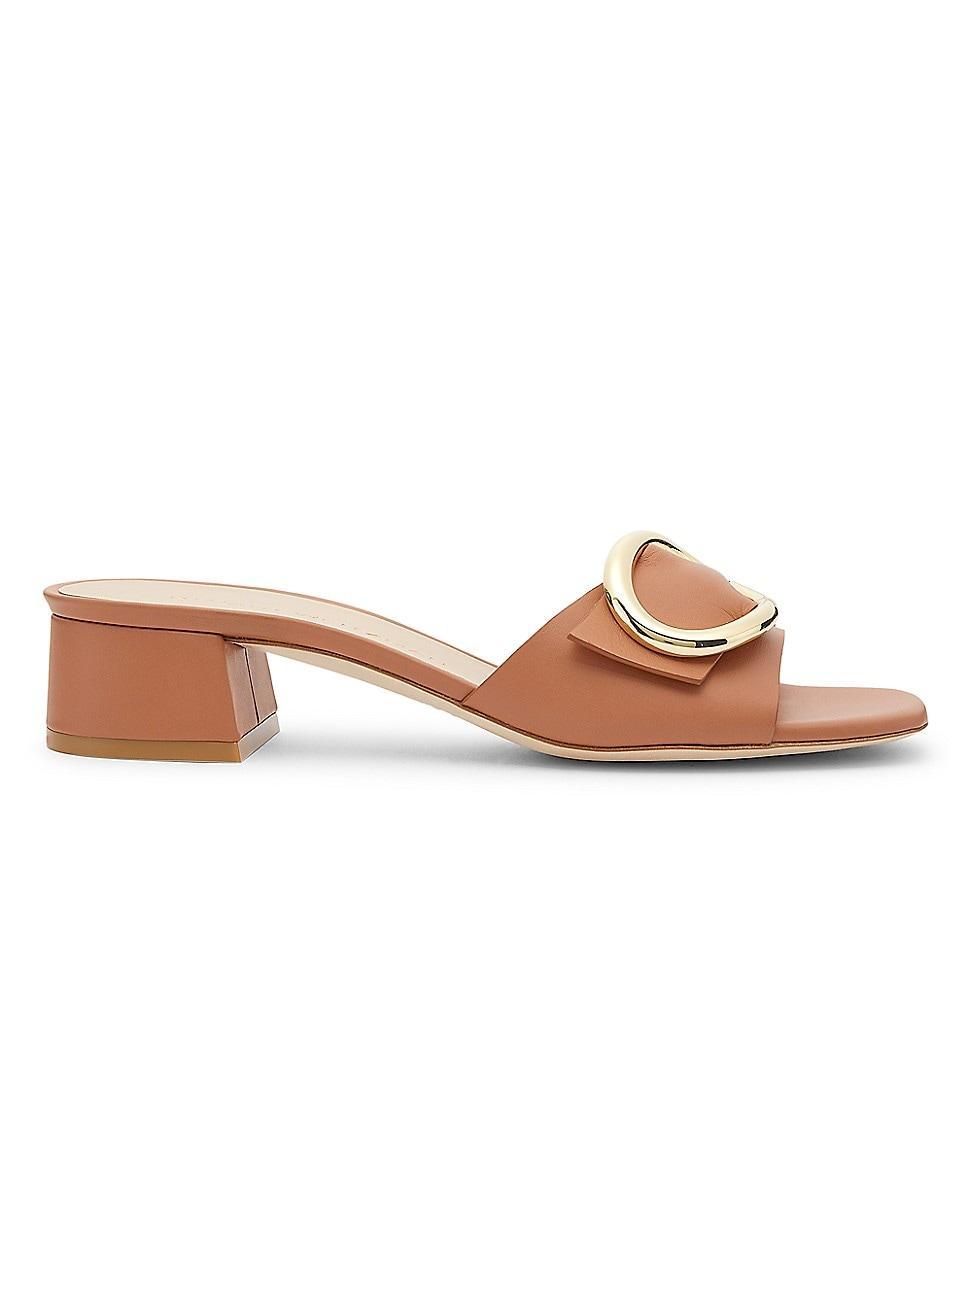 Sophie Knotted Block-Heel Mules Product Image